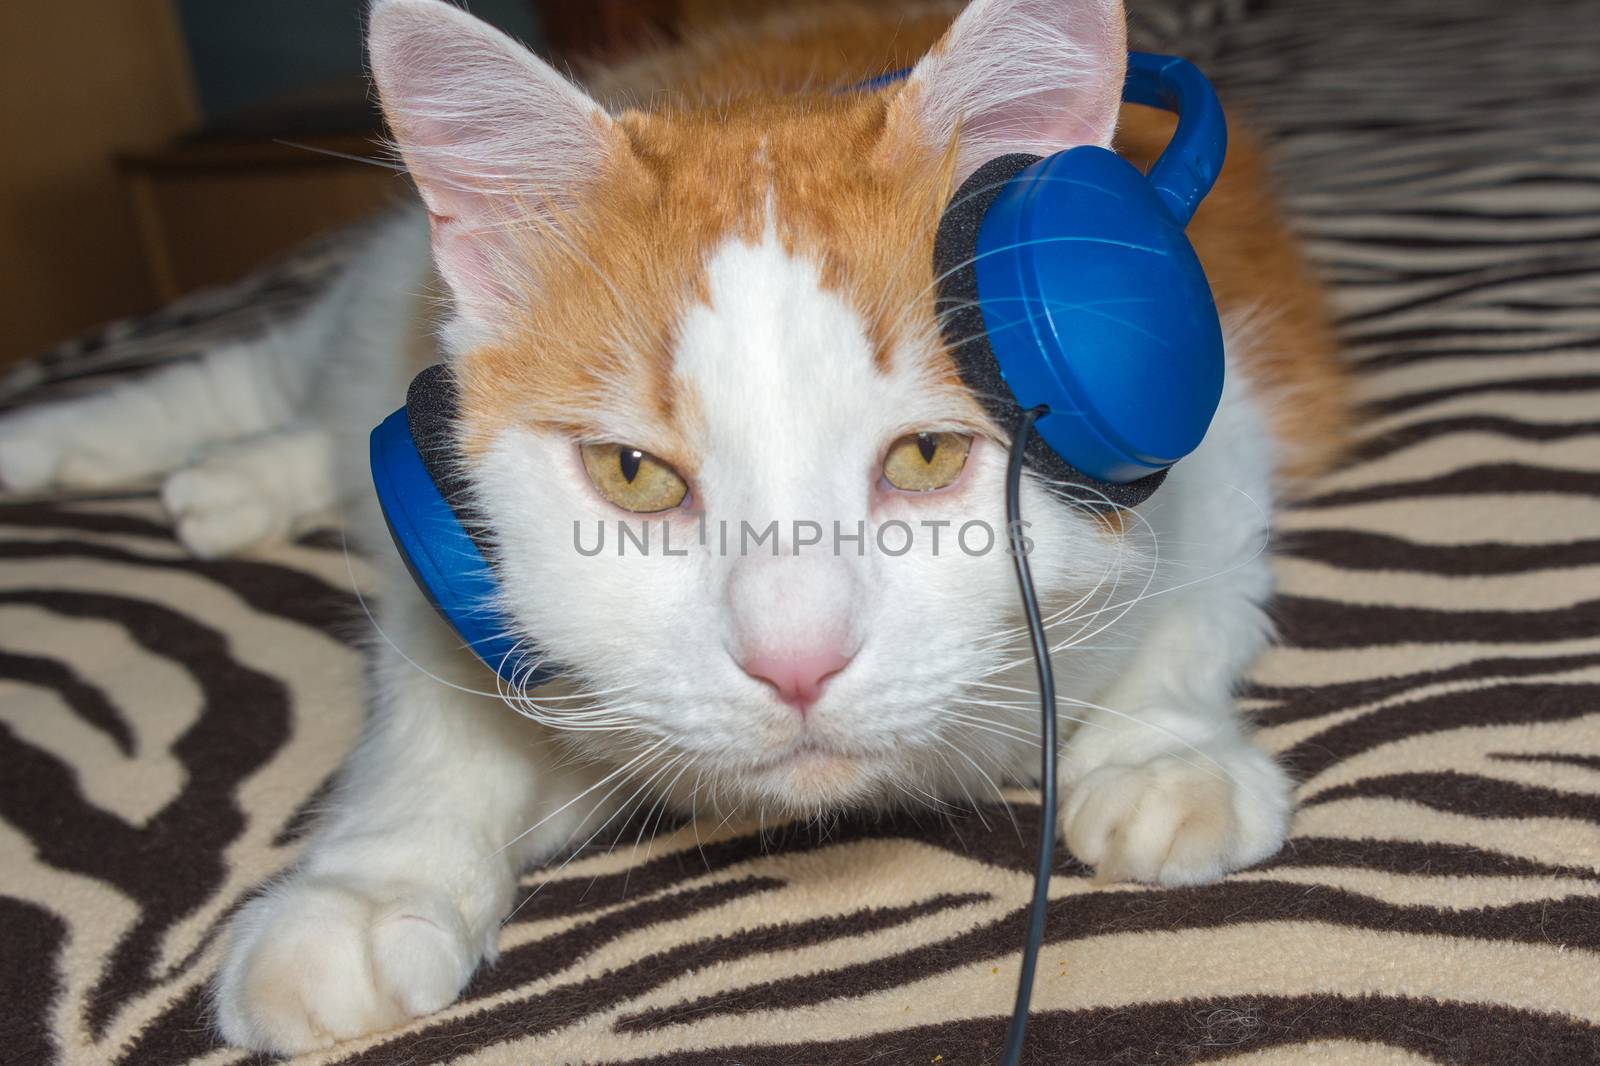 The cat, lying on the couch, alert when he heard the familiar sounds in the earpiece